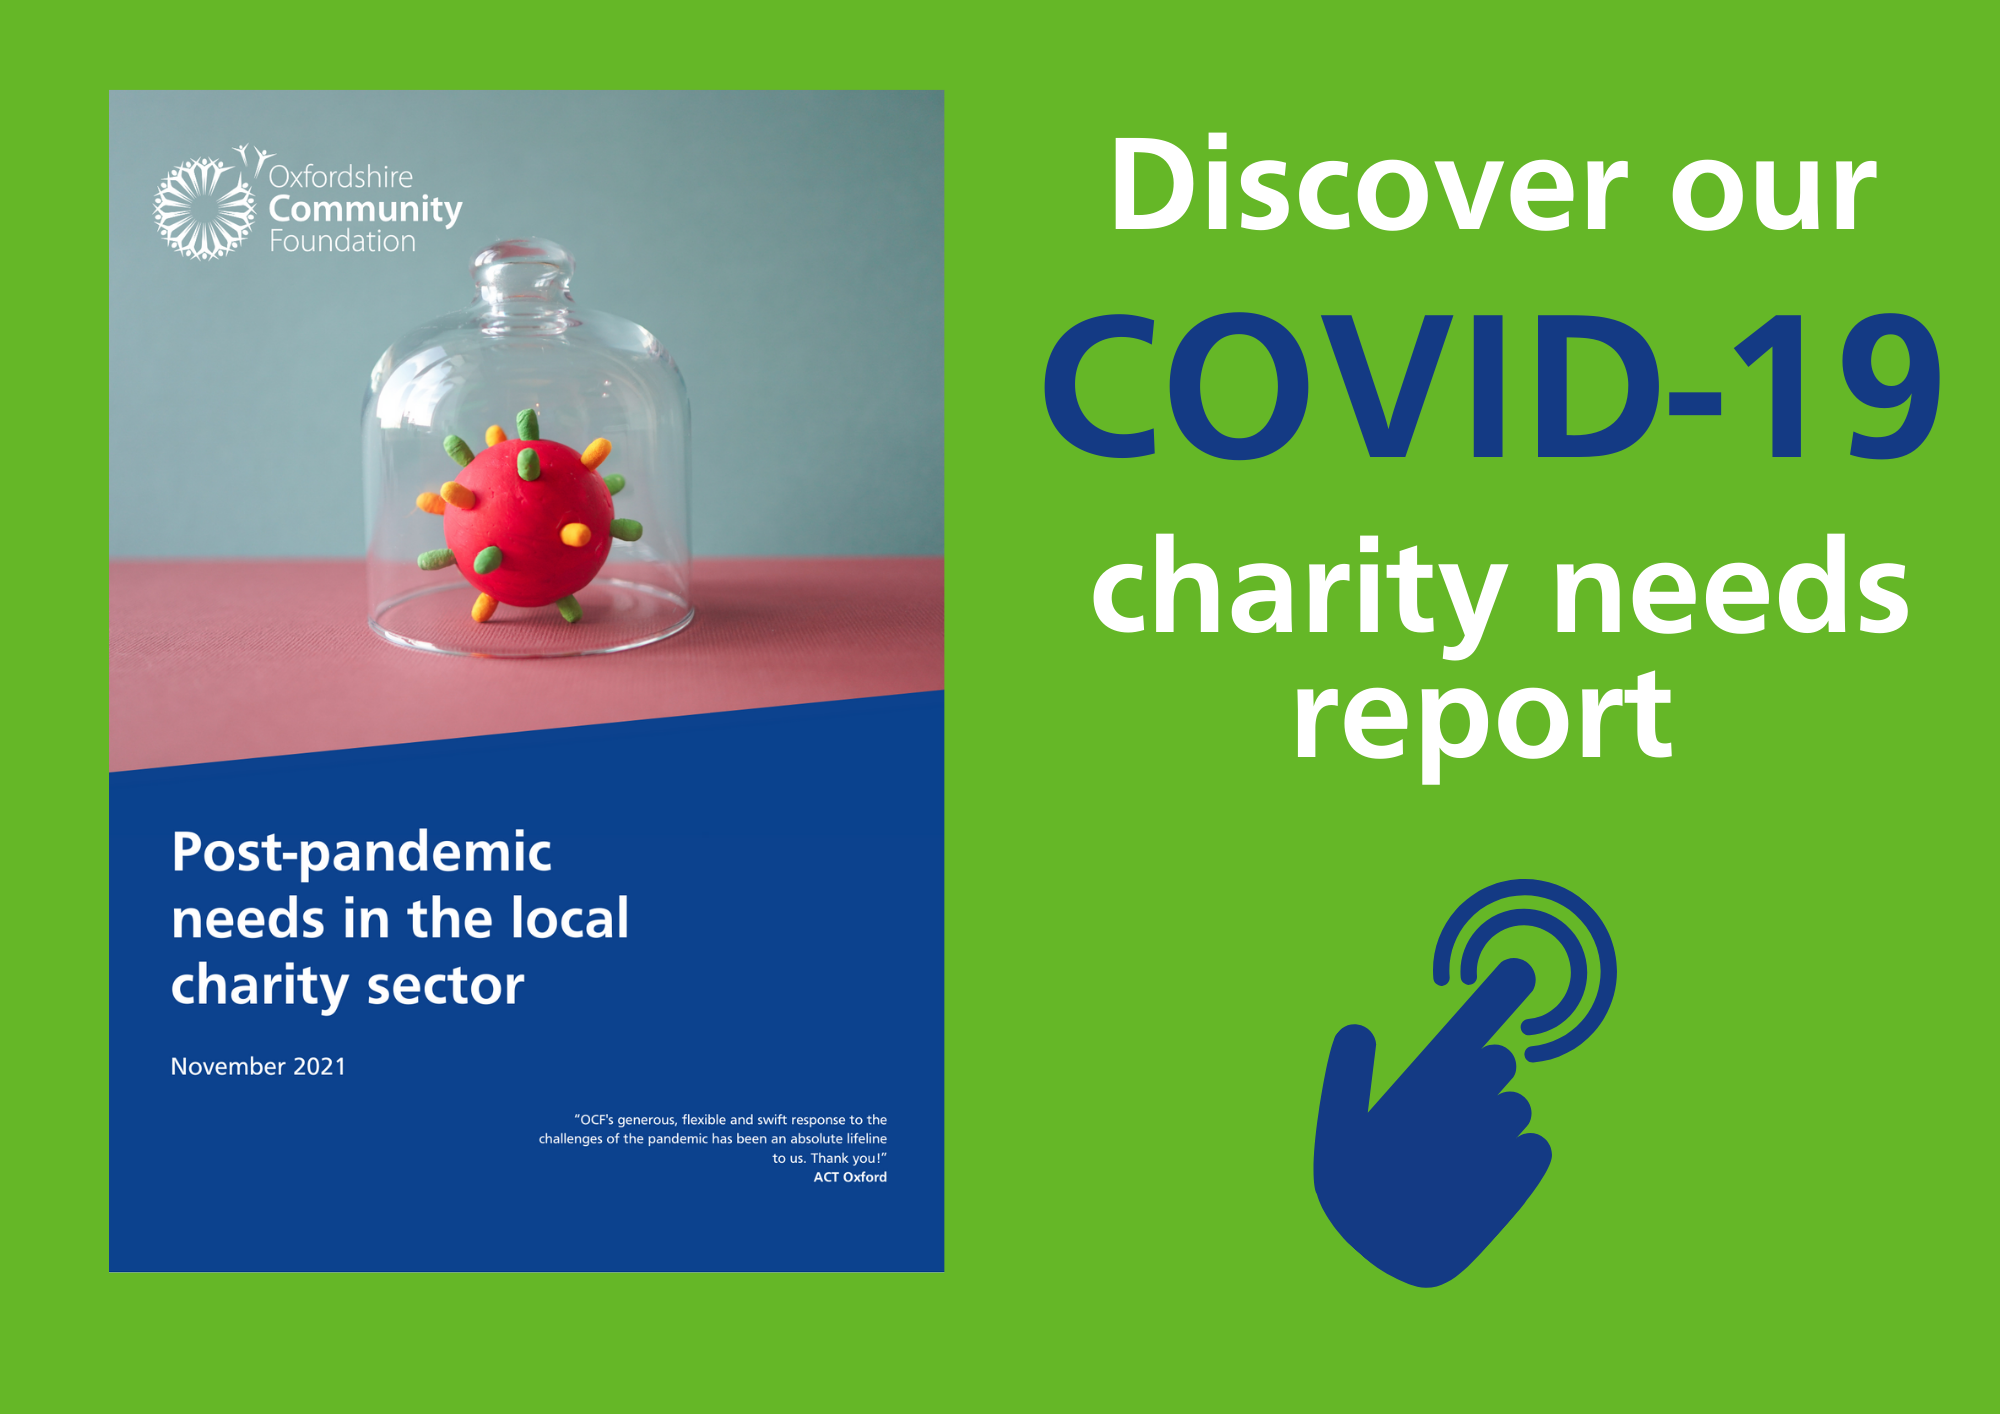 Discover our COVID-19 charity needs report